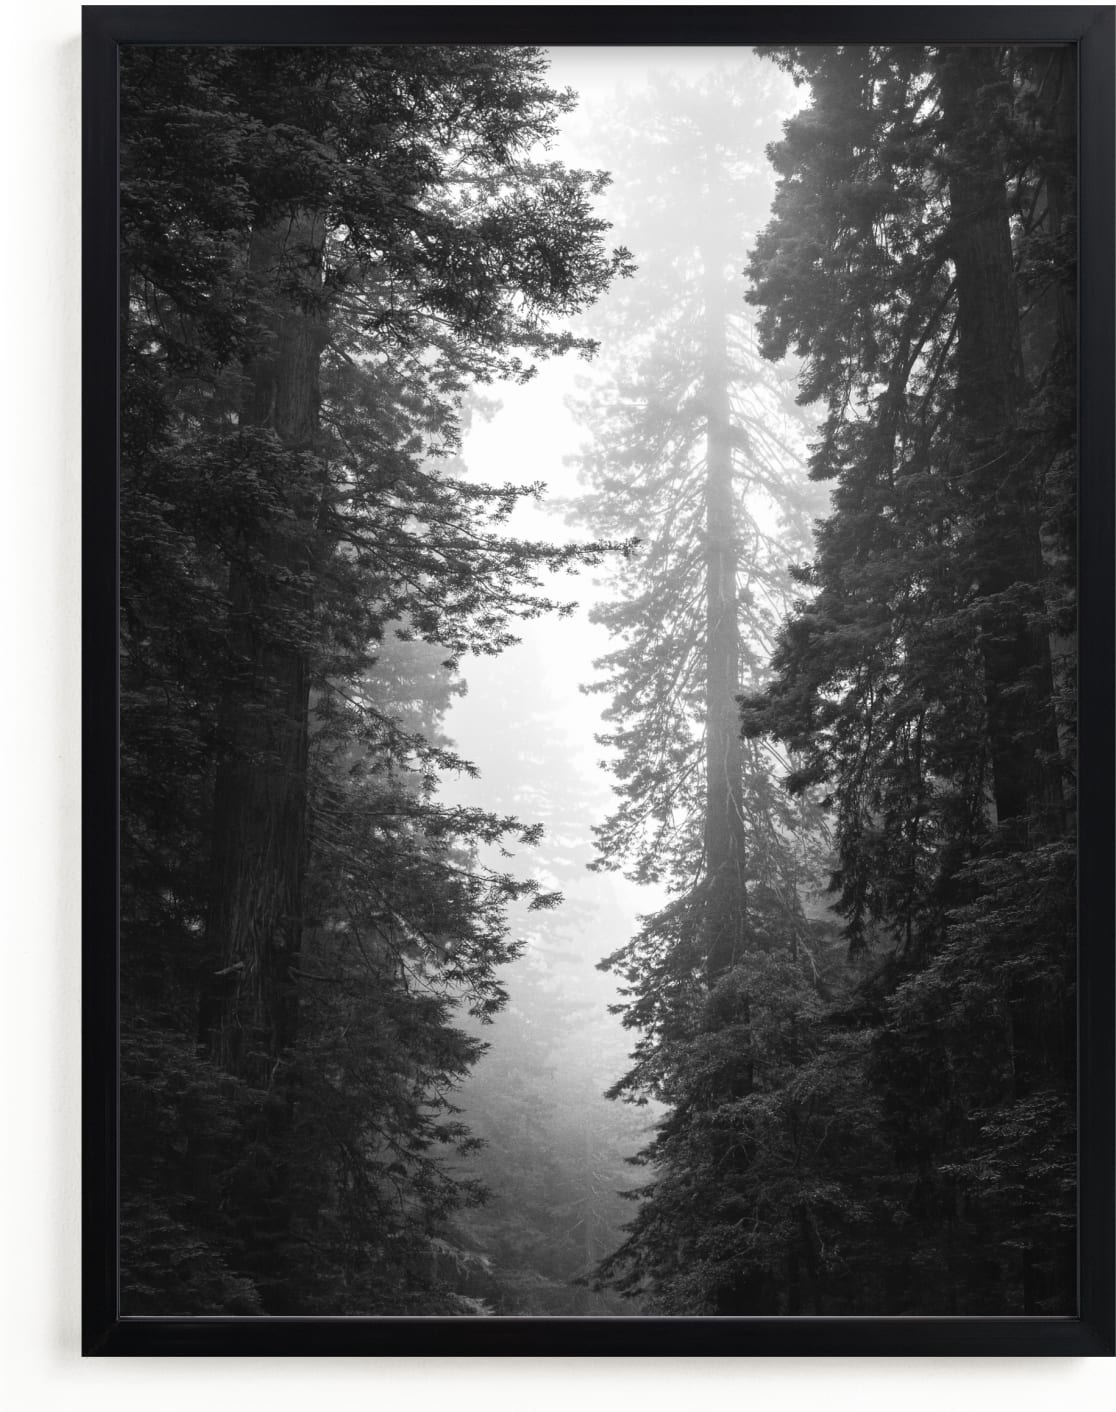 This is a black and white art by Kamala Nahas called Redwood Morning.